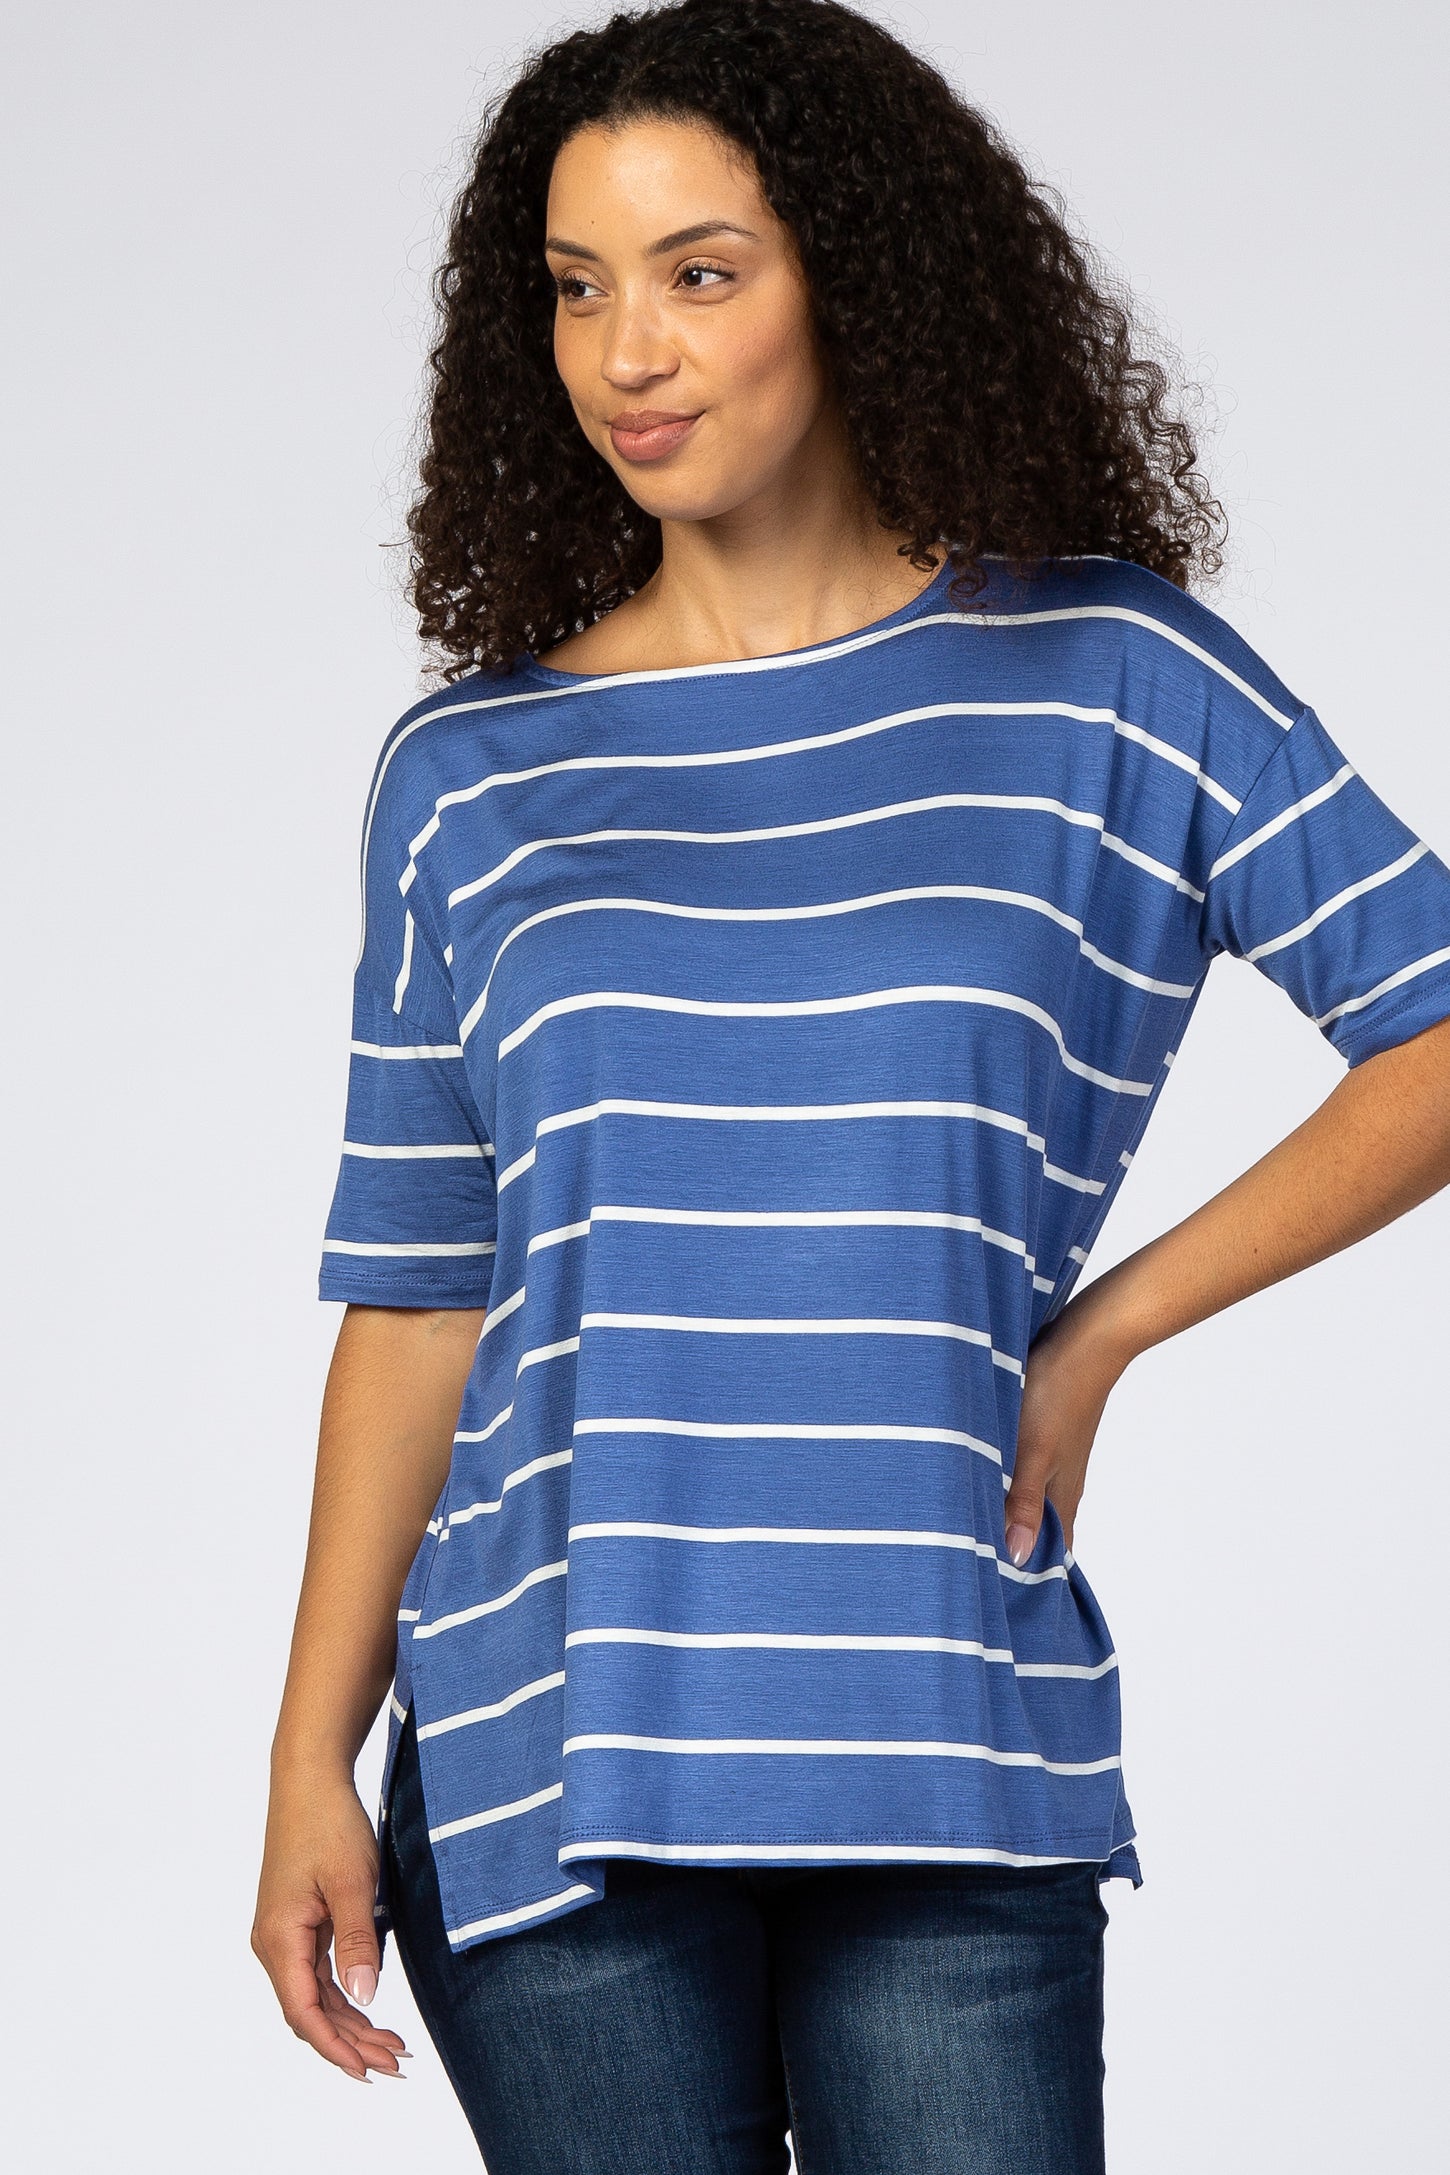 Blue Striped Short Sleeve Maternity Top